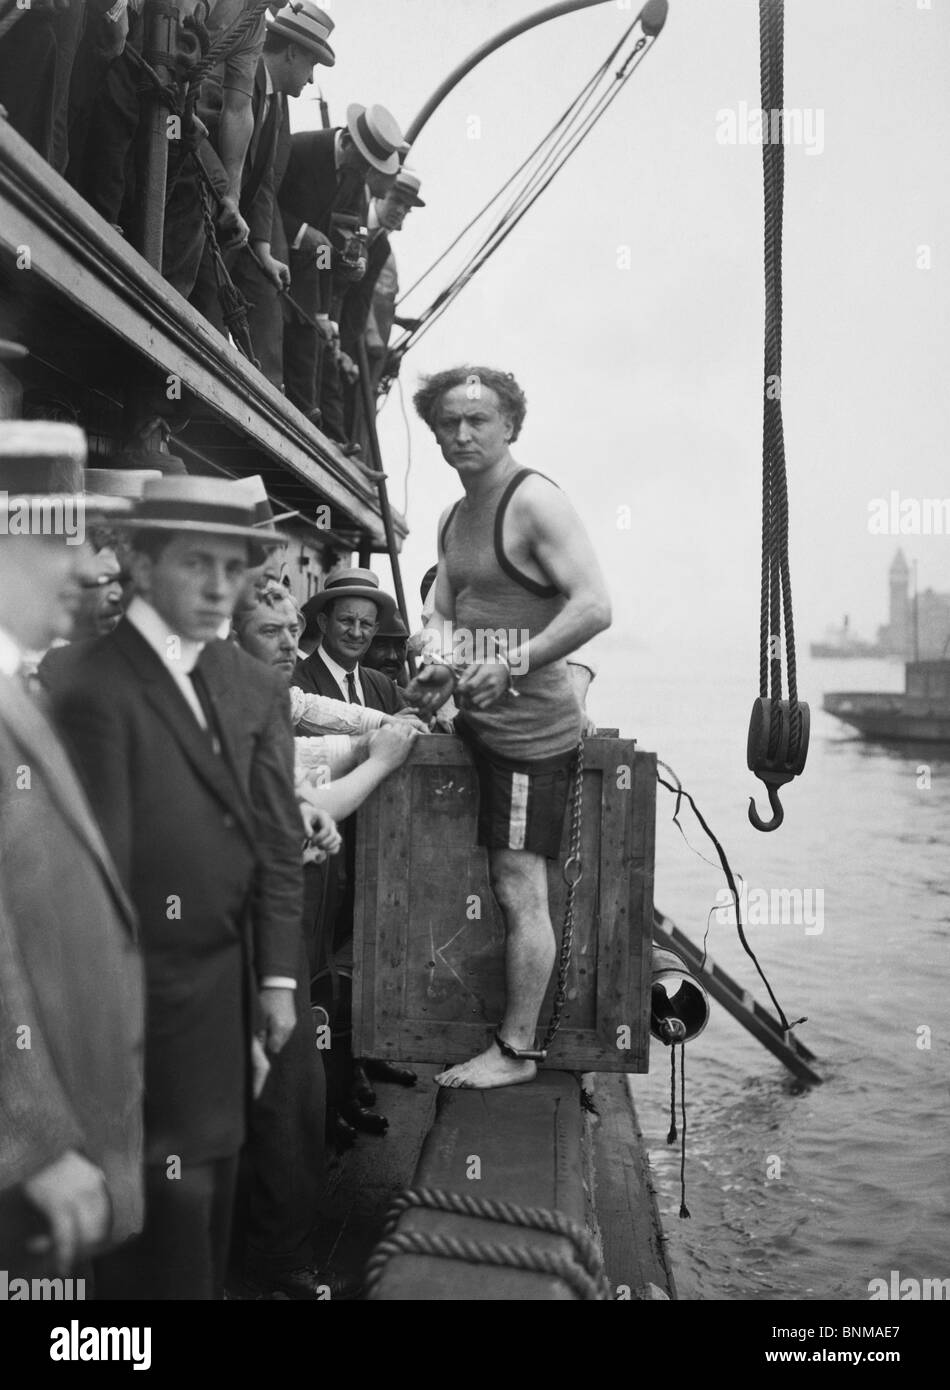 Escapologist Harry Houdini (1874 - 1926) preparing to perform his famous 'overboard box escape' for the first time in July 1912. Stock Photo